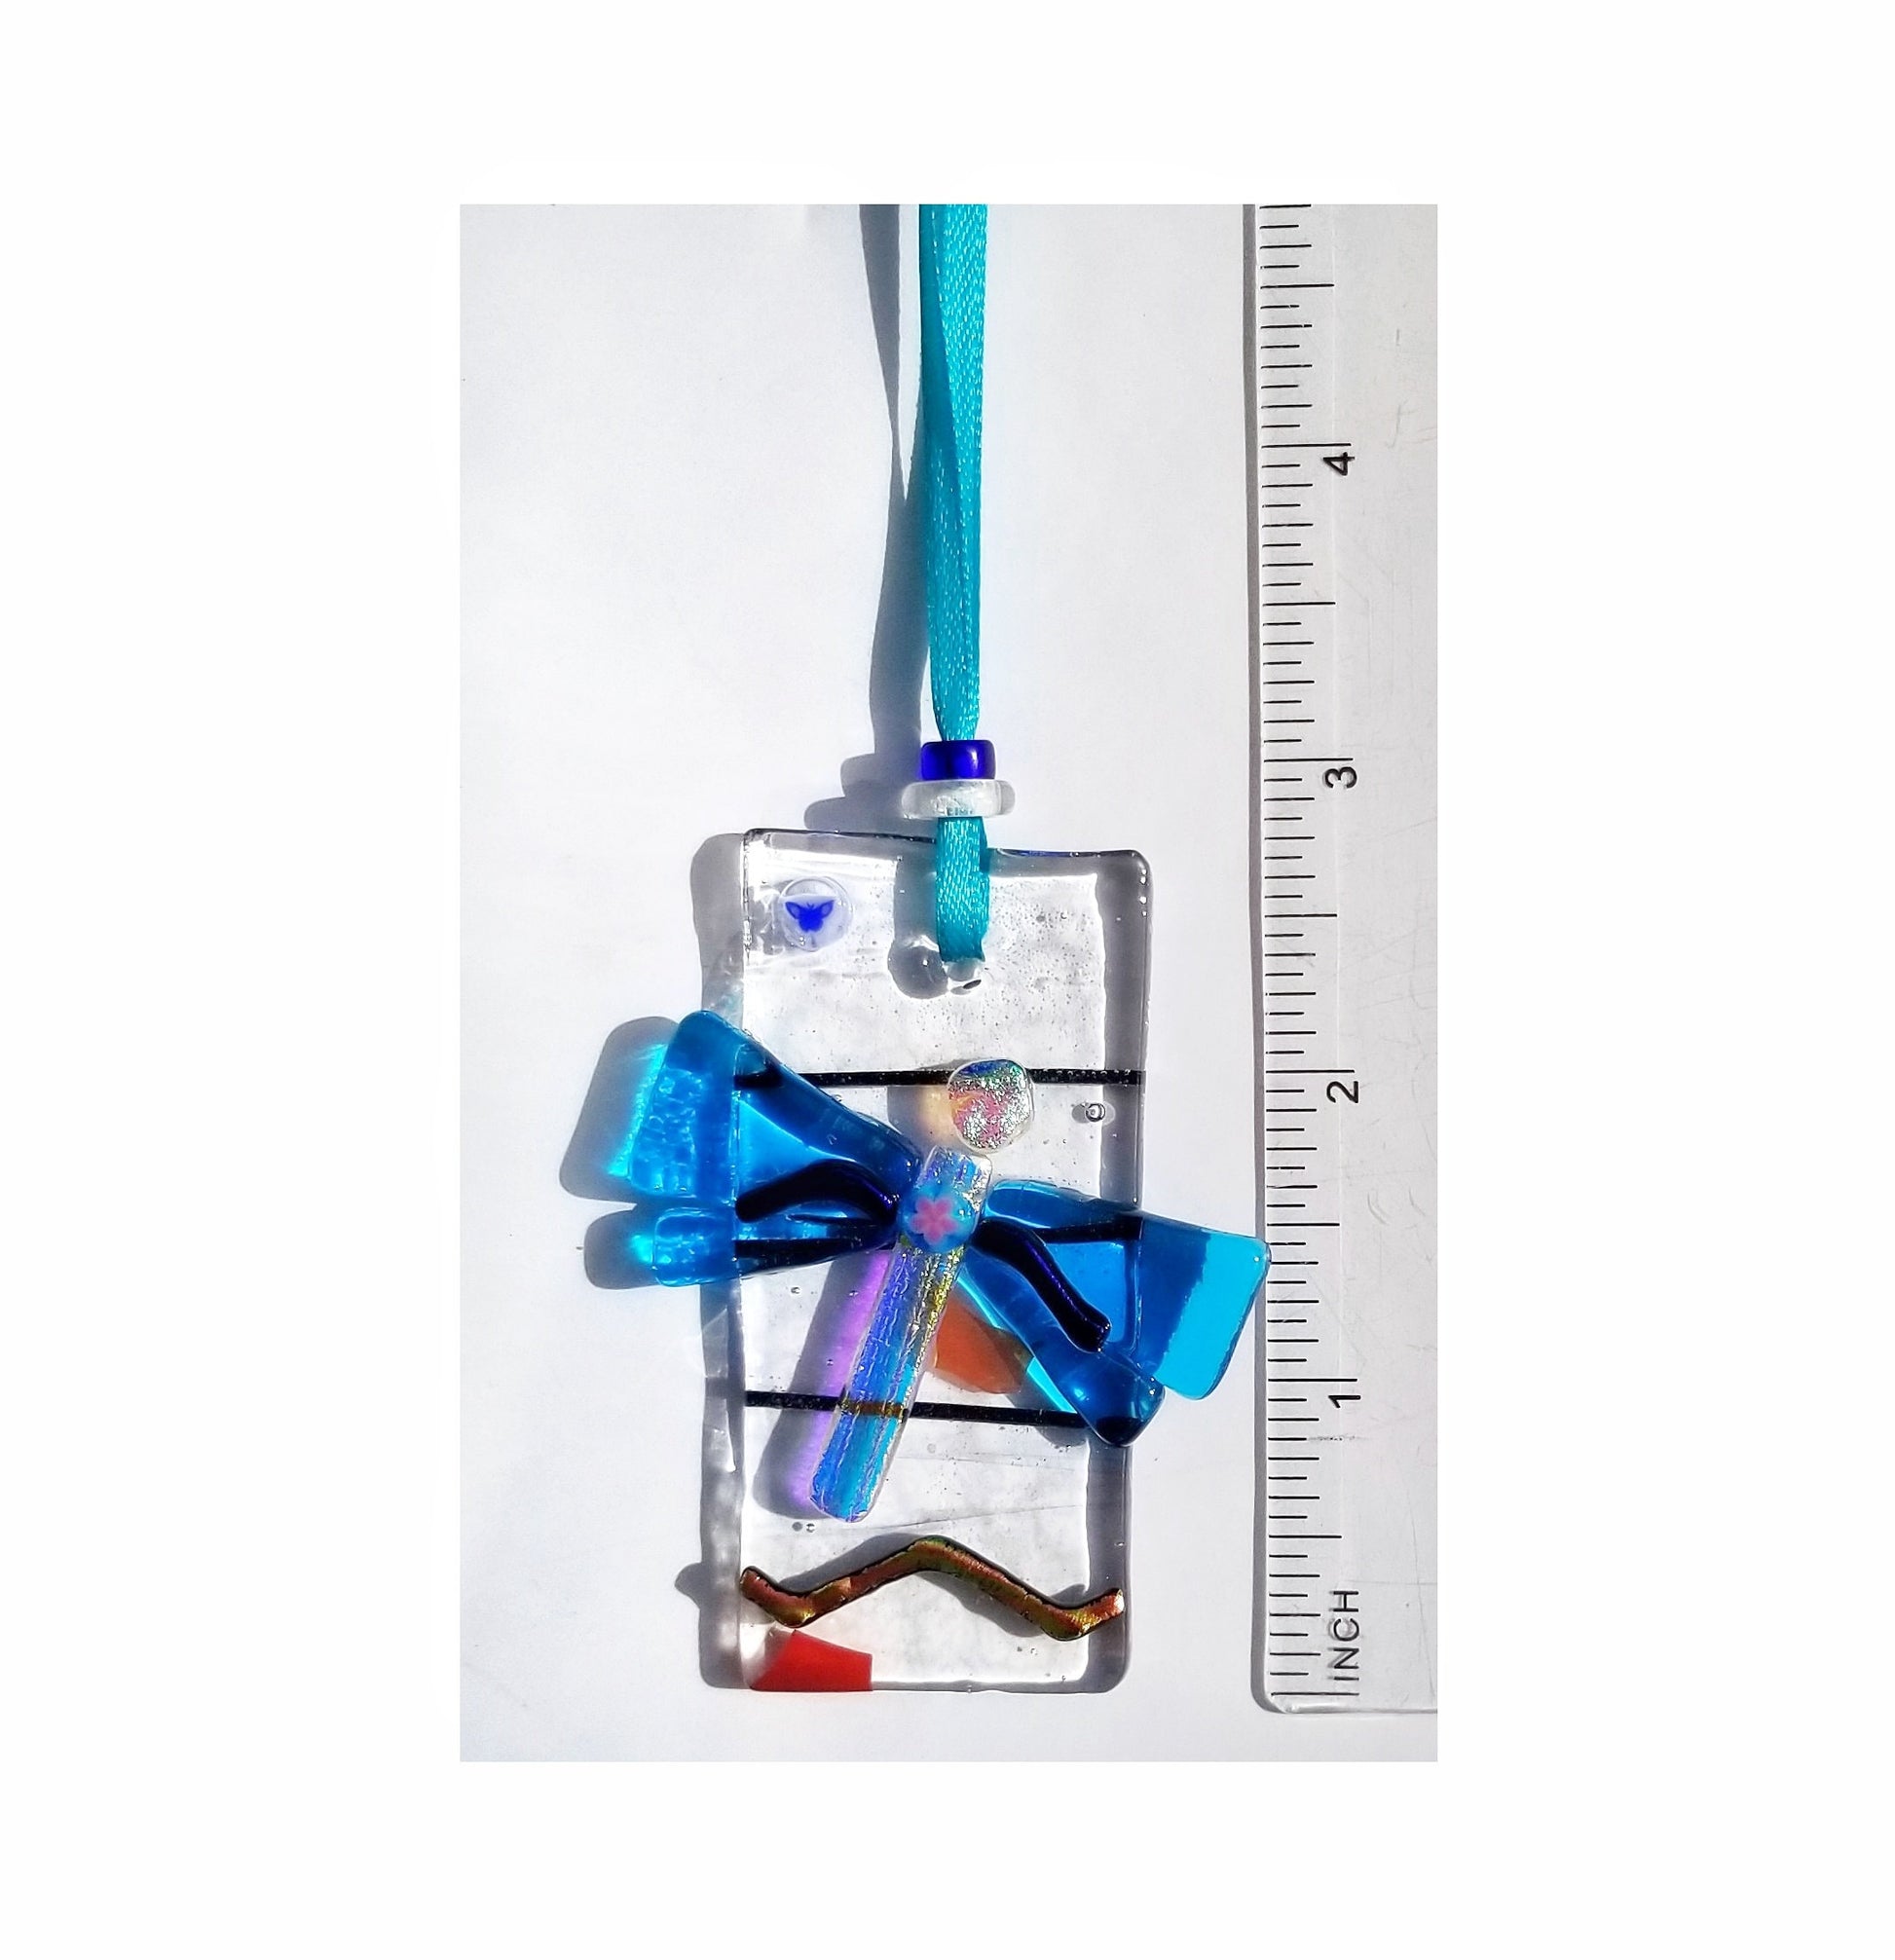 Glass Dragonfly Suncatcher. Azure Blue Wings with Shiny Dichroic Glass. Handmade by Me. Memory Charm, Gift Boxed for Mother, Special Friend.